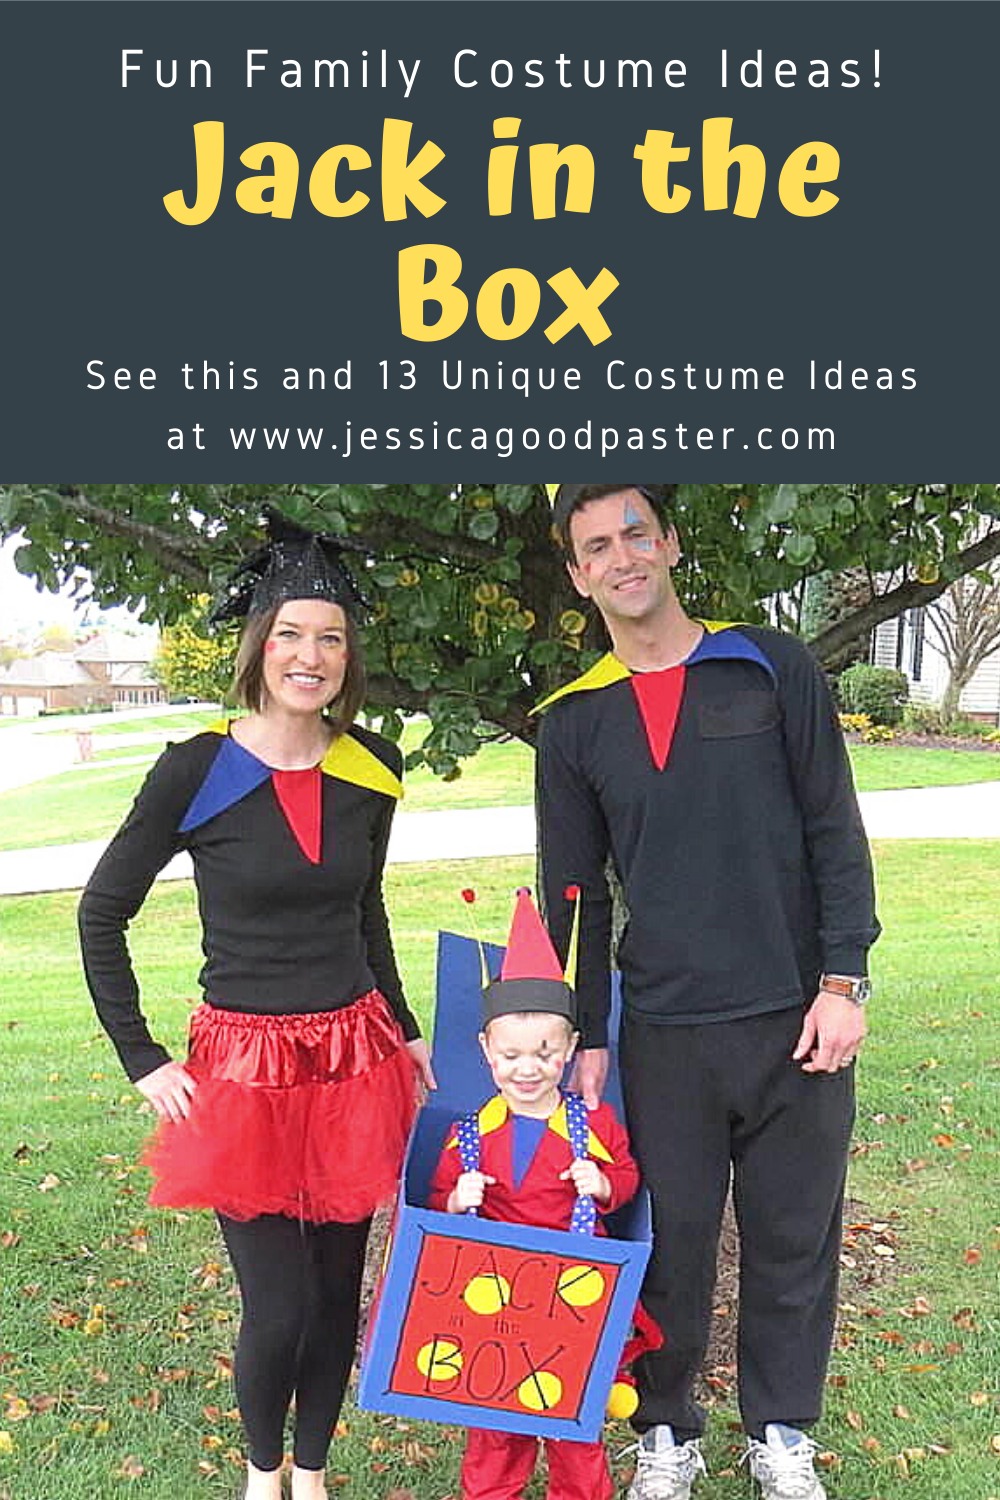 Jack in the Box Family Costume and 13 Unique Halloween Costume Ideas for Your Family or Group! Find the perfect costume for individuals, couples, families, groups, and kids. Includes some of the best DIY costume ideas as well. #halloween #costumes #halloweencostumes #couplecostumes #groupcostume #diycostumes #familycostume #trunkortreat